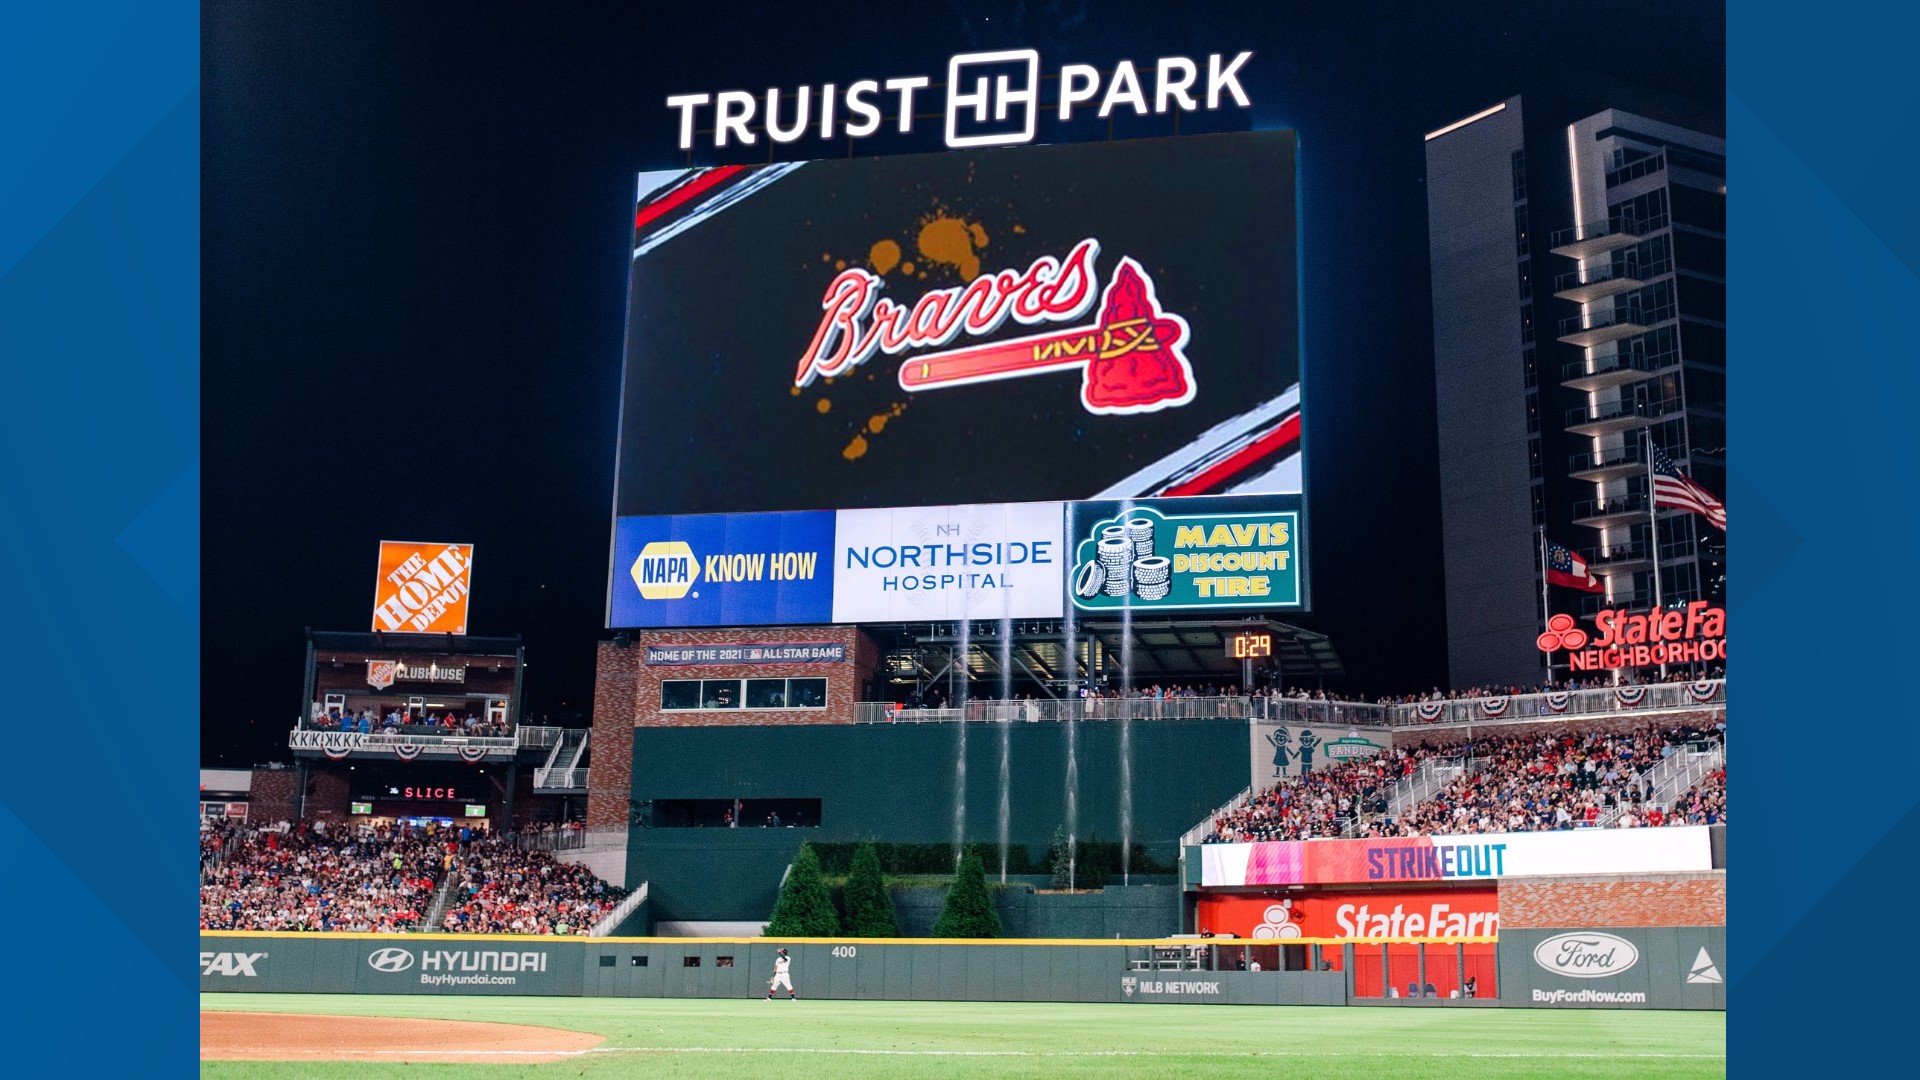 Truist Park officially the home of the Braves